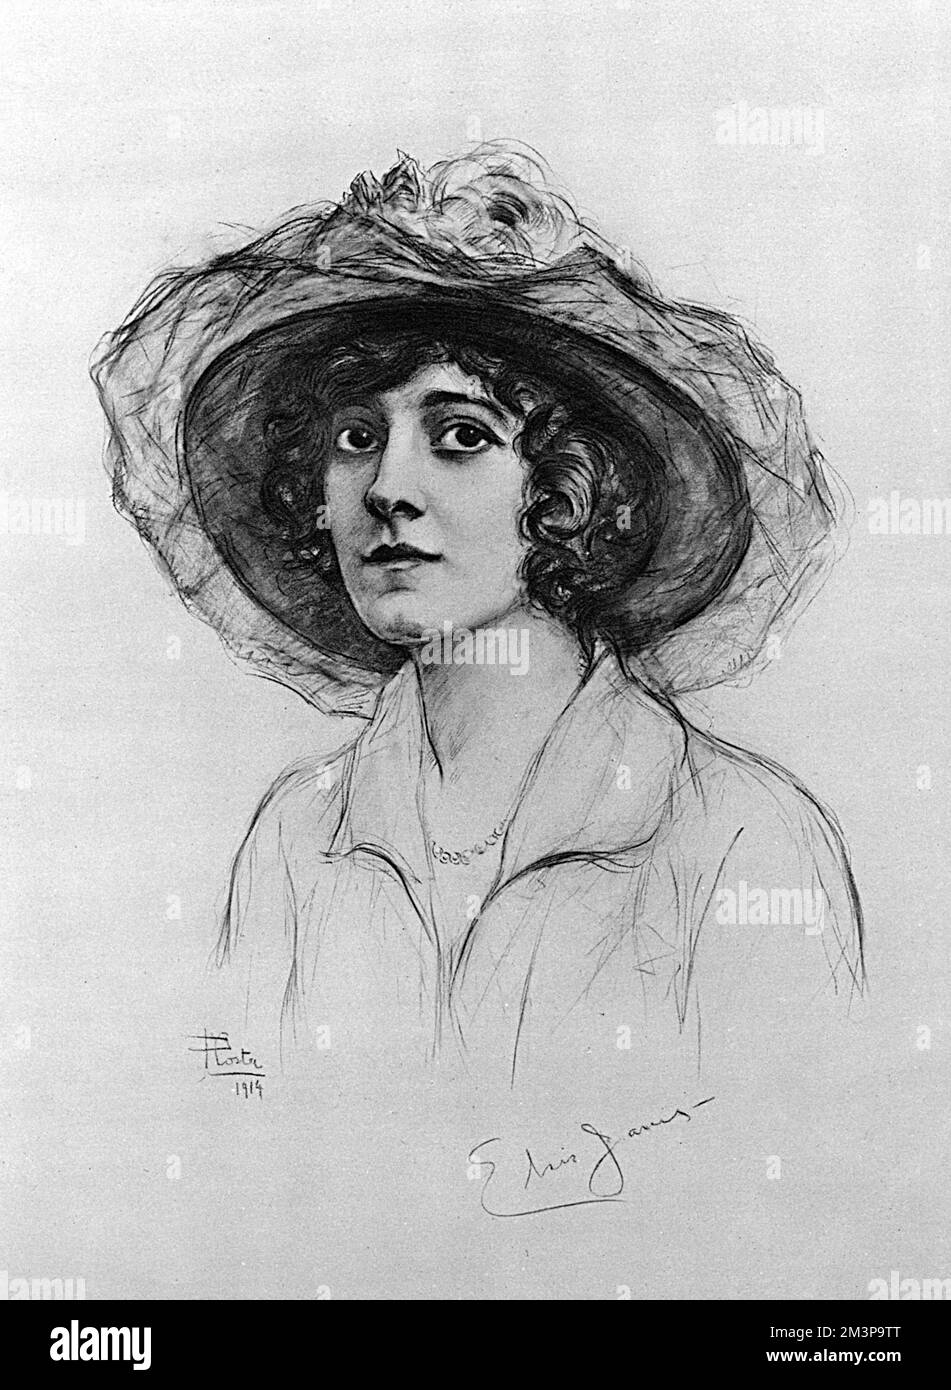 Elsie Janis (March 16, 1889  February 26, 1956), American singer, songwriter, actress, and screenwriter. Entertaining the troops during World War I immortalized her as &quot;the sweetheart of the AEF&quot; (American Expeditionary Force).  Pictured in The Sketch at the time she was leaving London and her popular role in a revue at the Palace Theatre, 'The Passing Show,' to go back to America.  She would return periodically throughout the war and remained one of London's favourite and highest paid actresses.       Date: 1914 Stock Photo